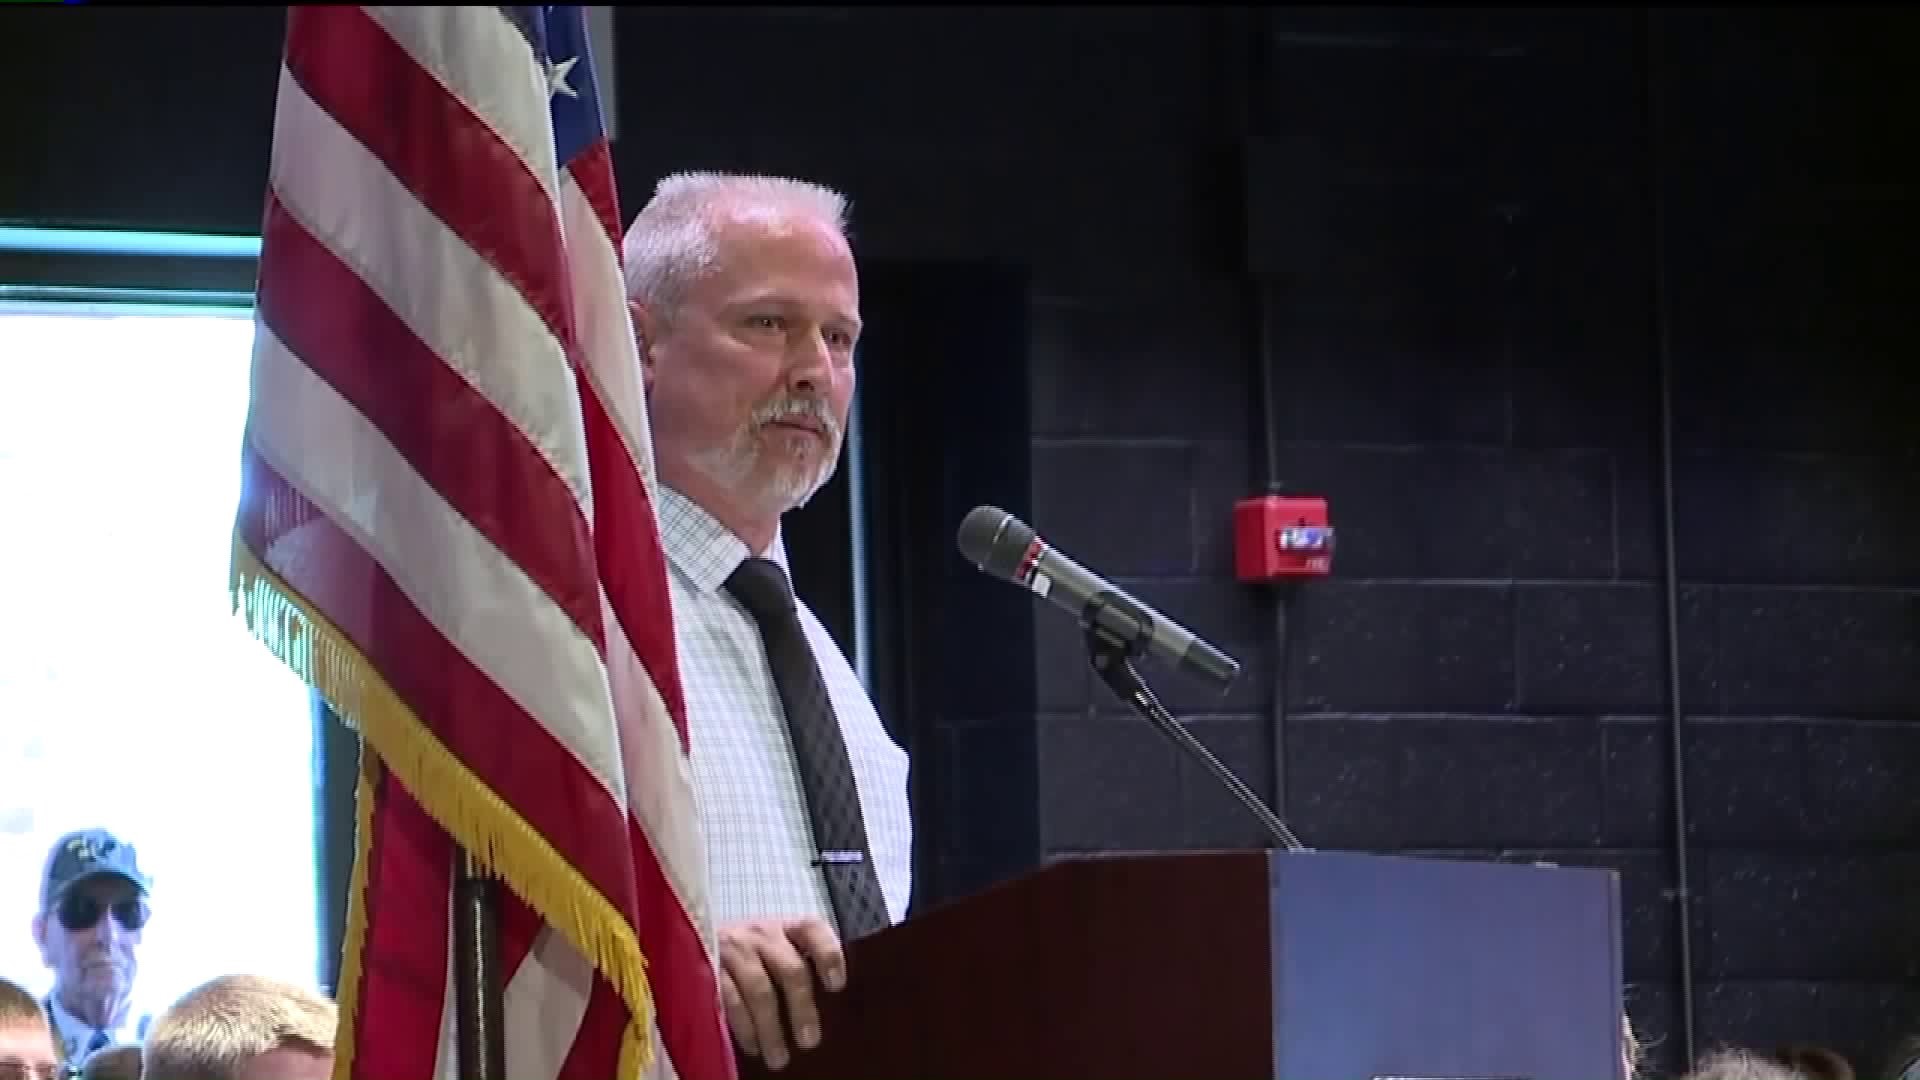 Speaker Reminds Crowd What Memorial Day Is All About